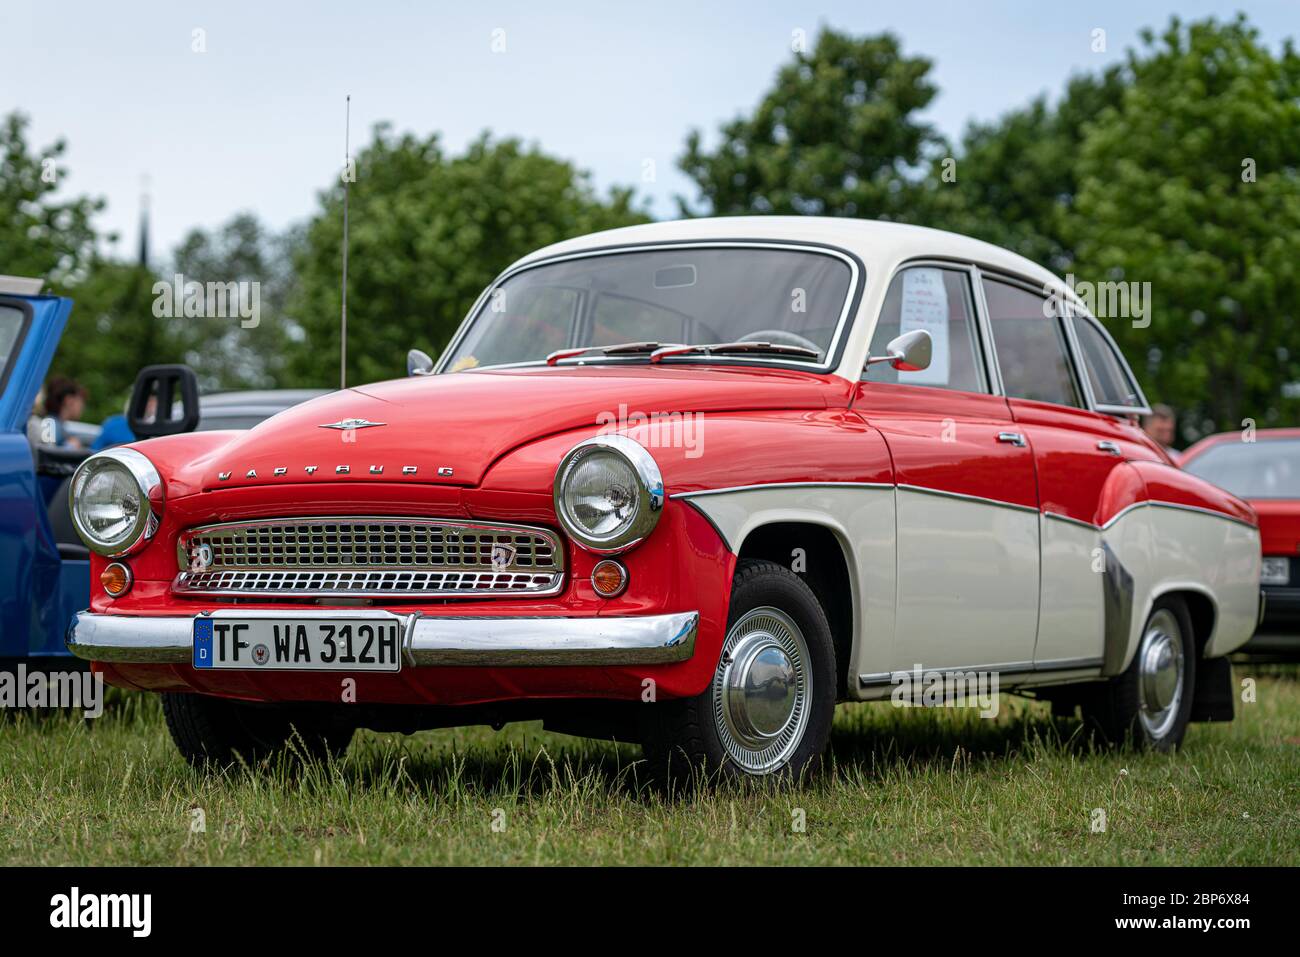 Page 2 Wartburg Car High Resolution Stock Photography And Images Alamy